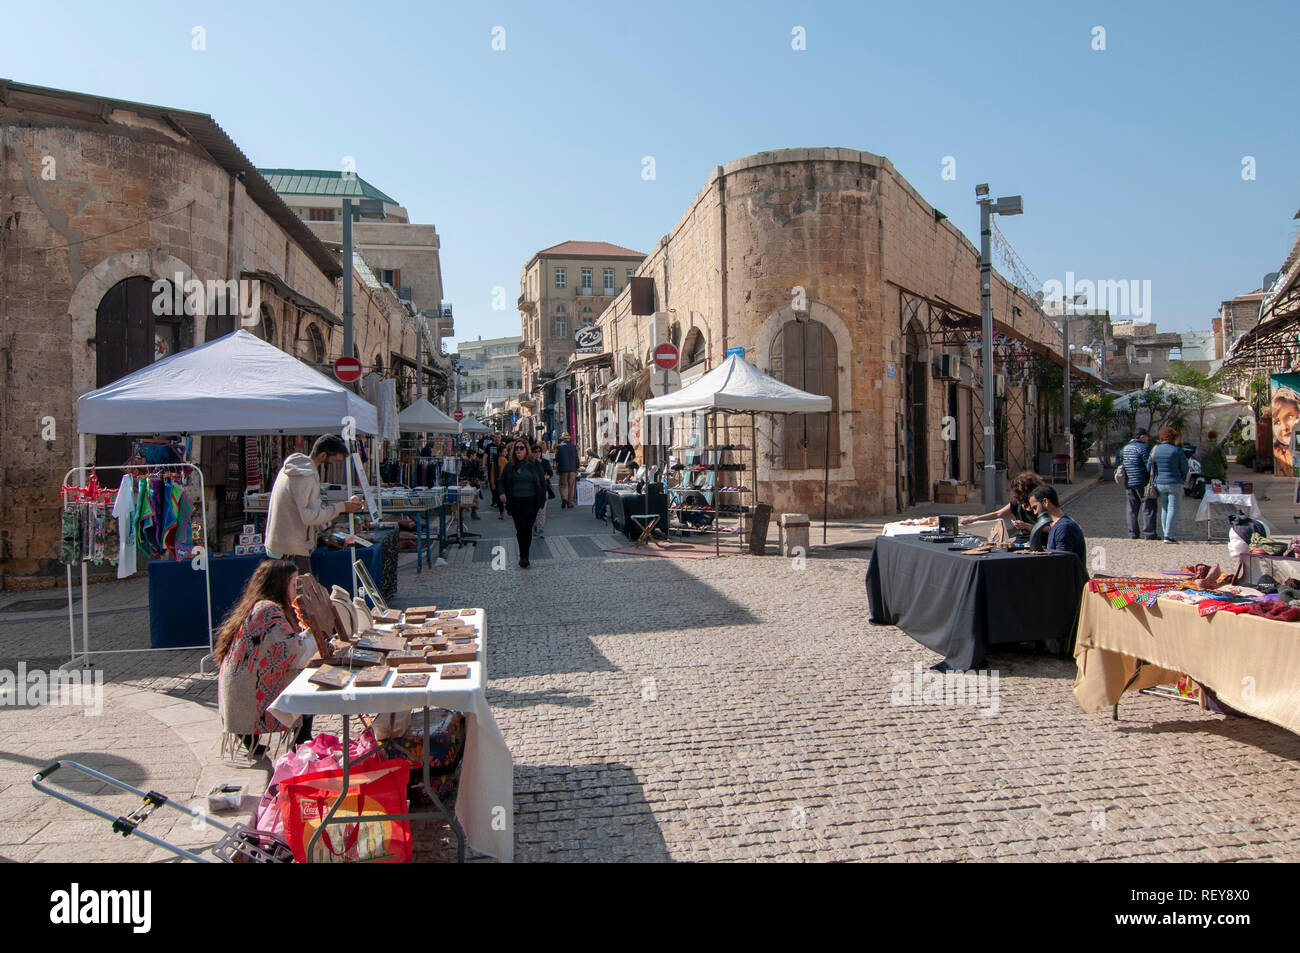 handcrafts and art for sale on stall in the weekly fair at the Greek Market, Jaffa, Israel Stock Photo